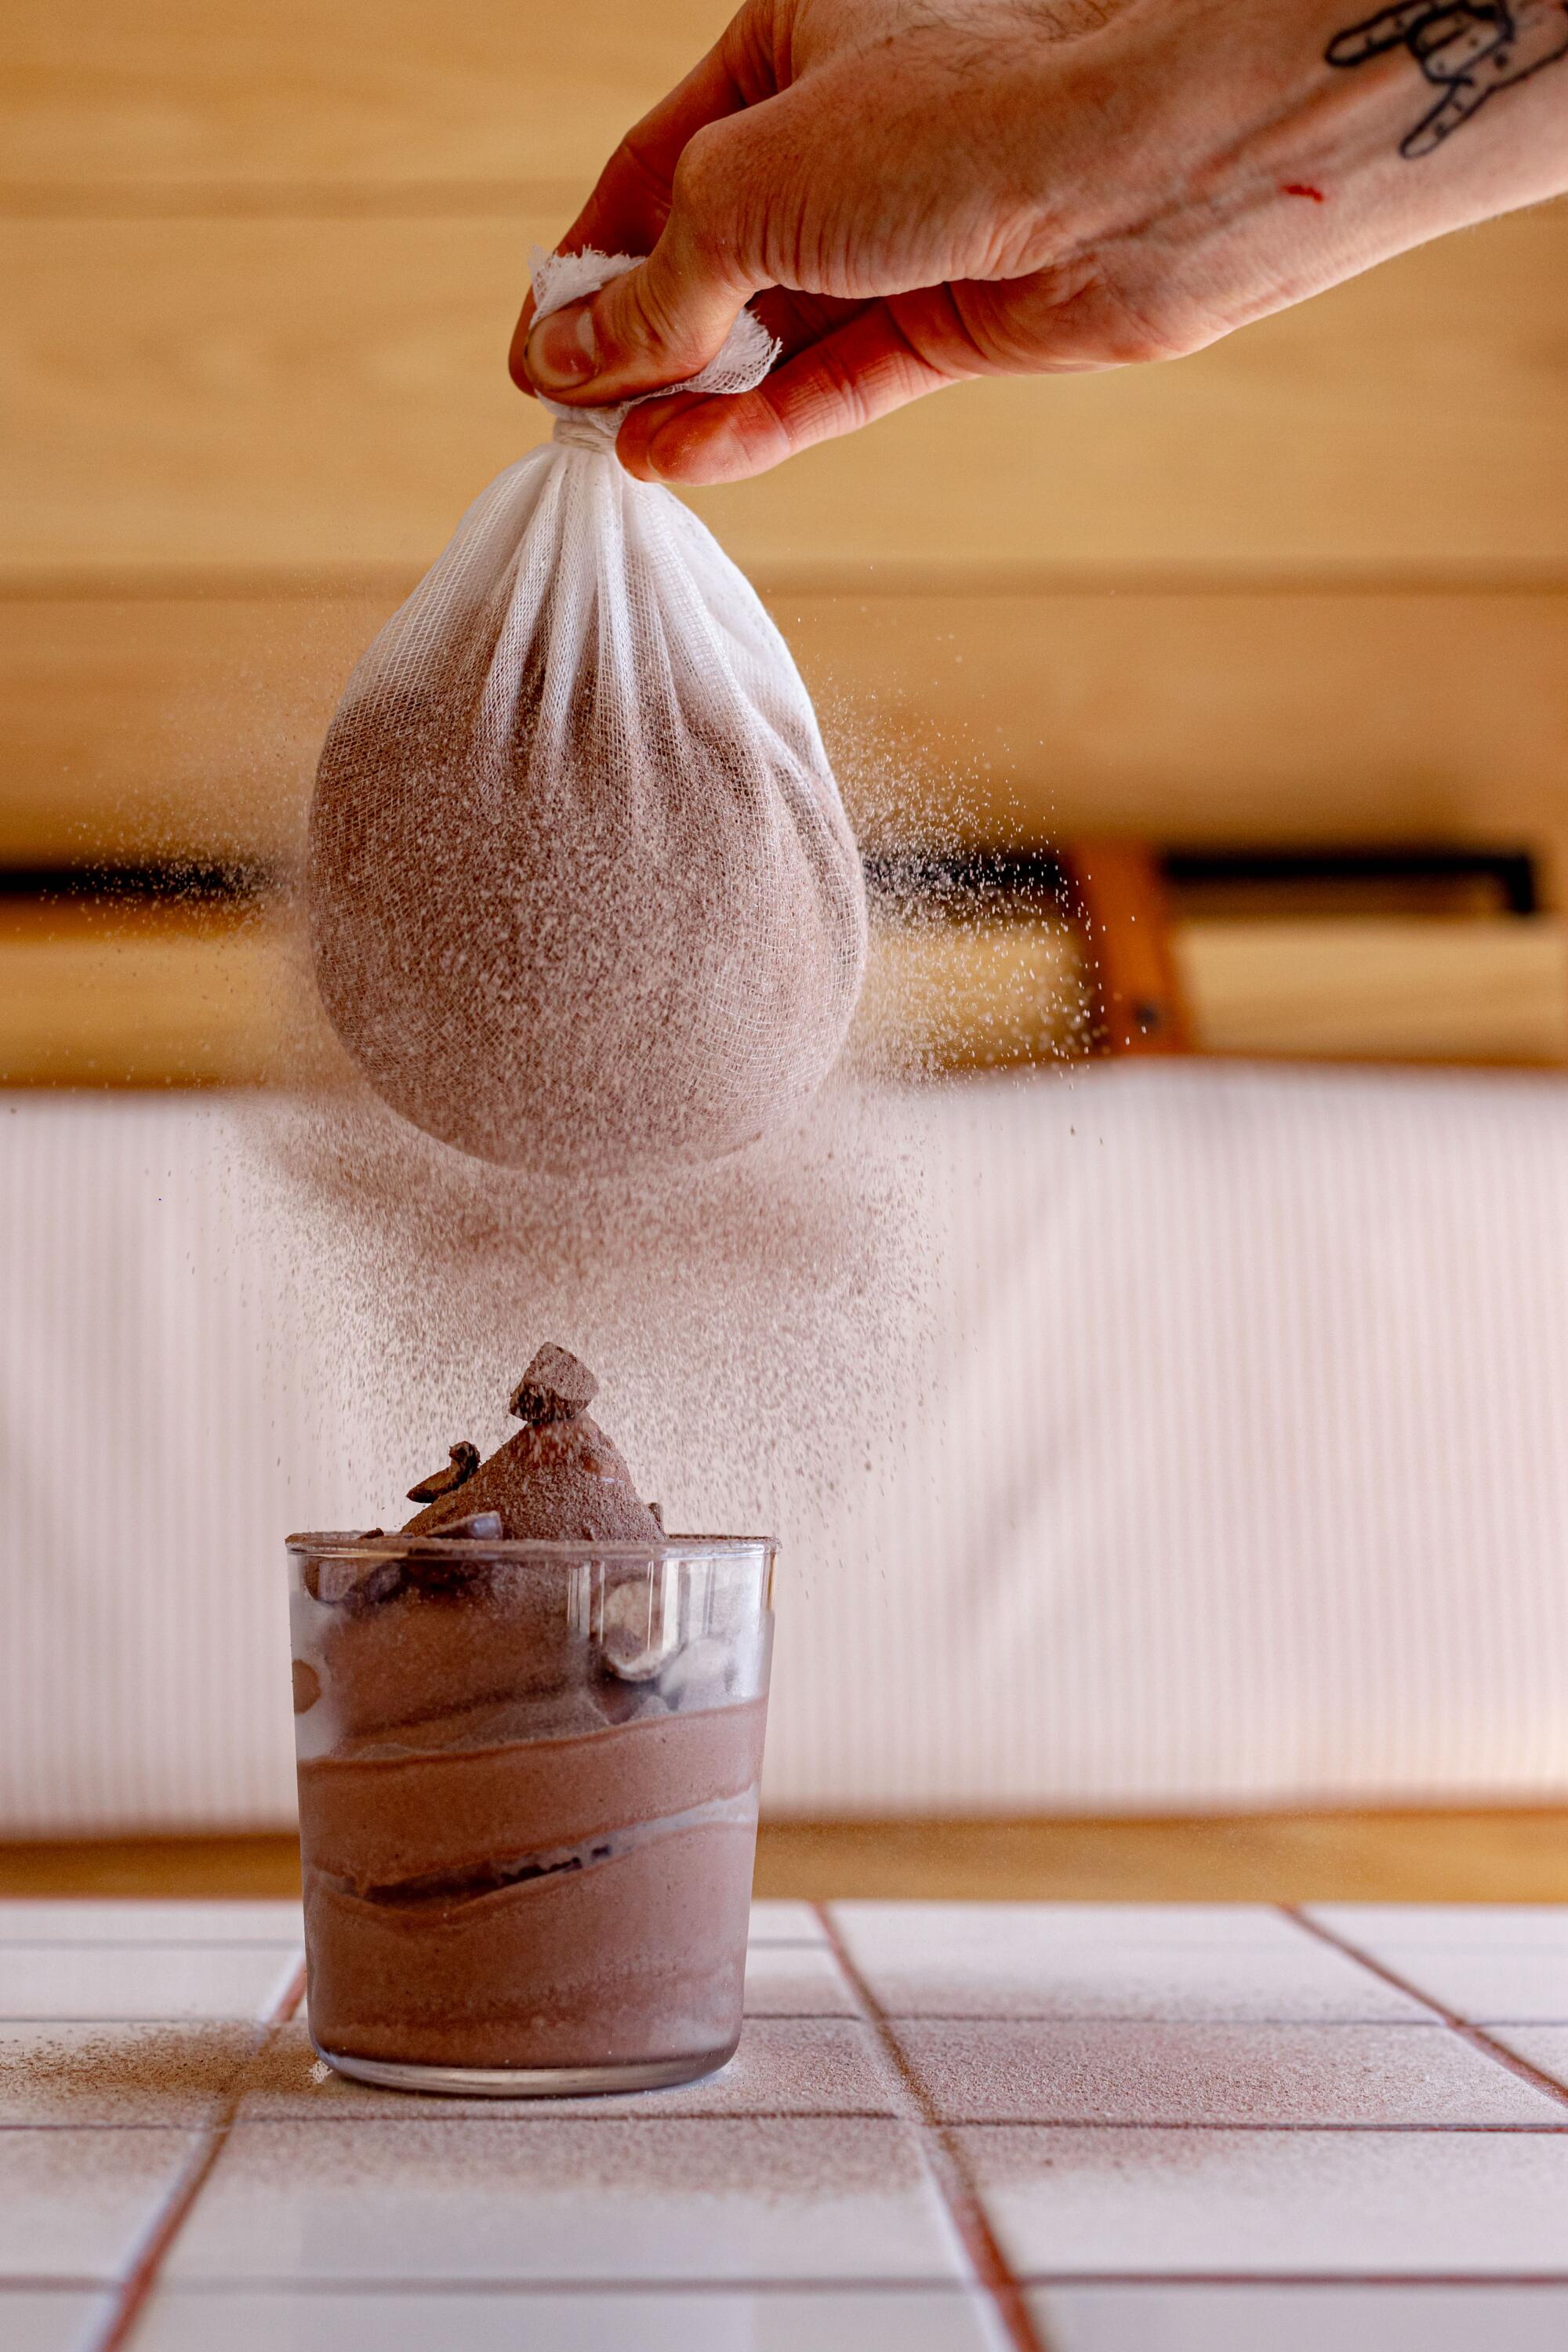 Chef Miles Shorey dusts malted chai soft serve with chocolate-chai powder.